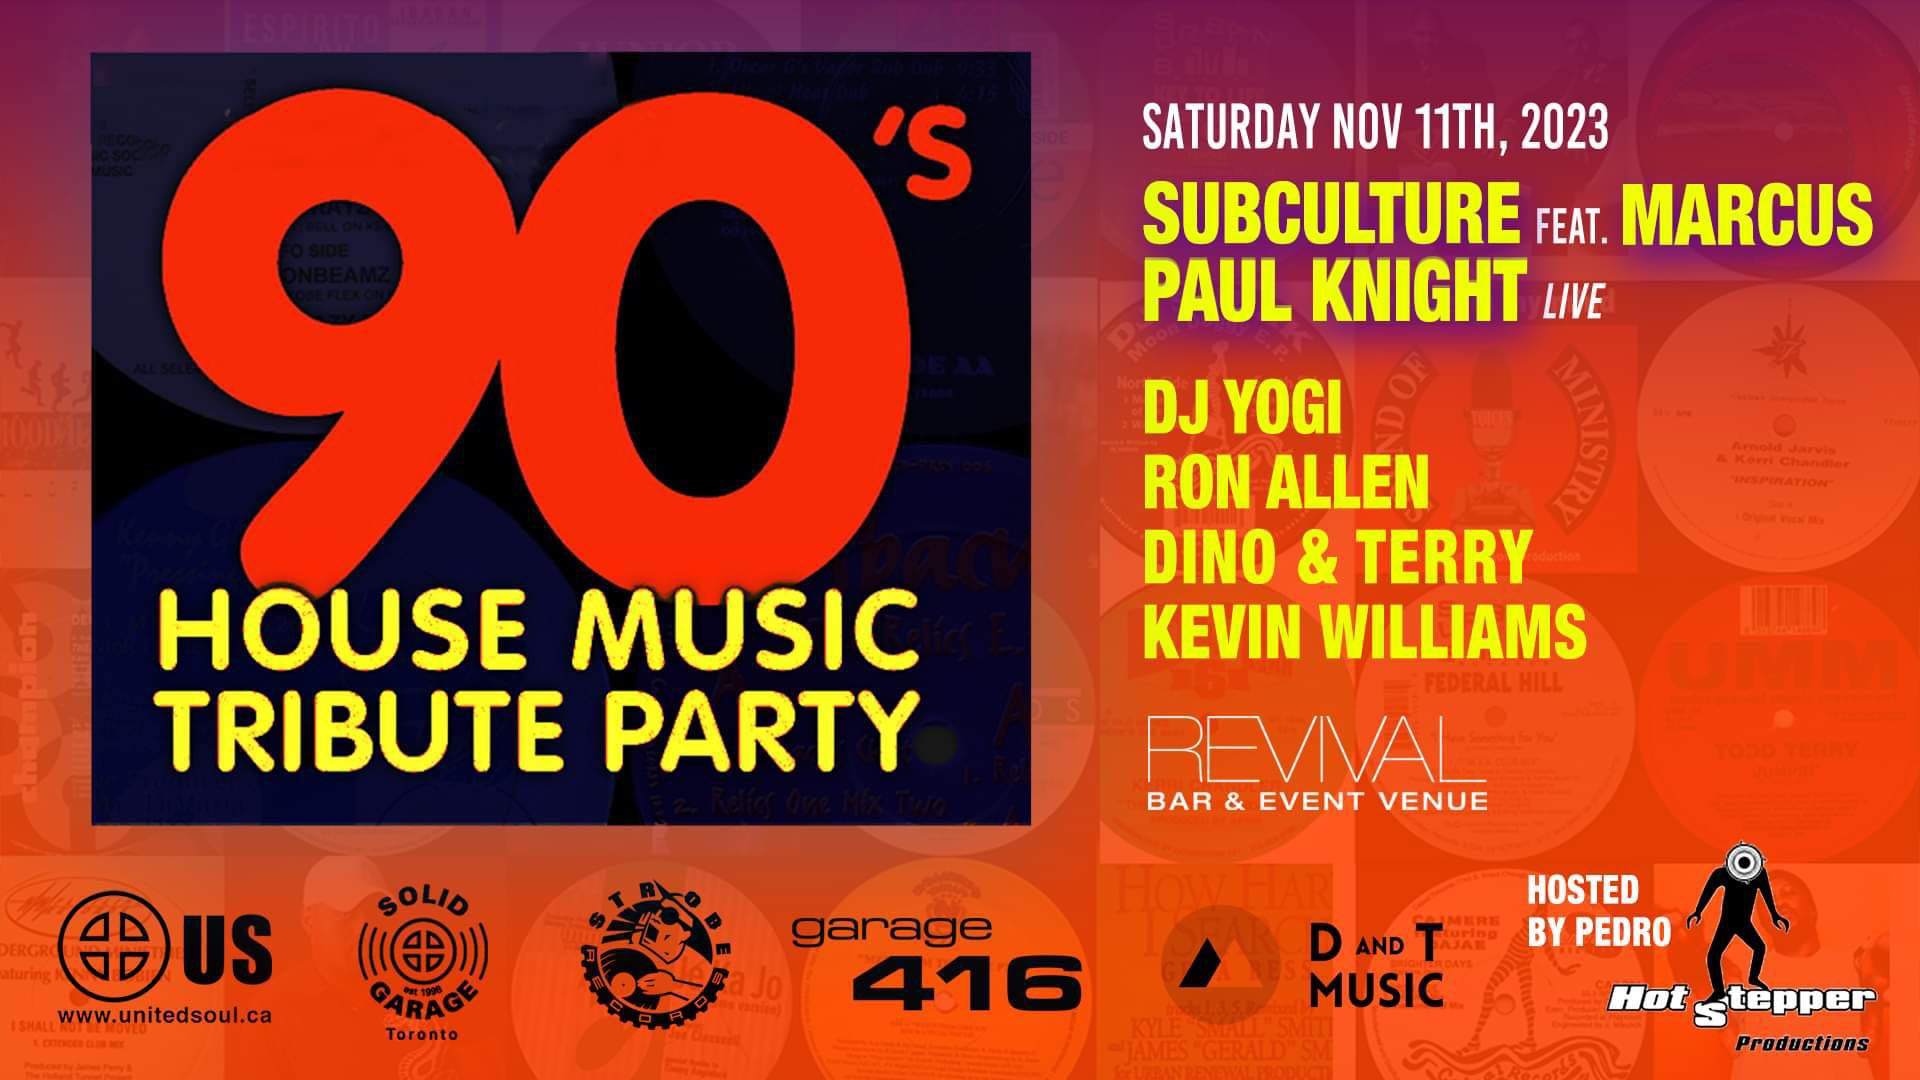 90's House Music Tribute Party - フライヤー表